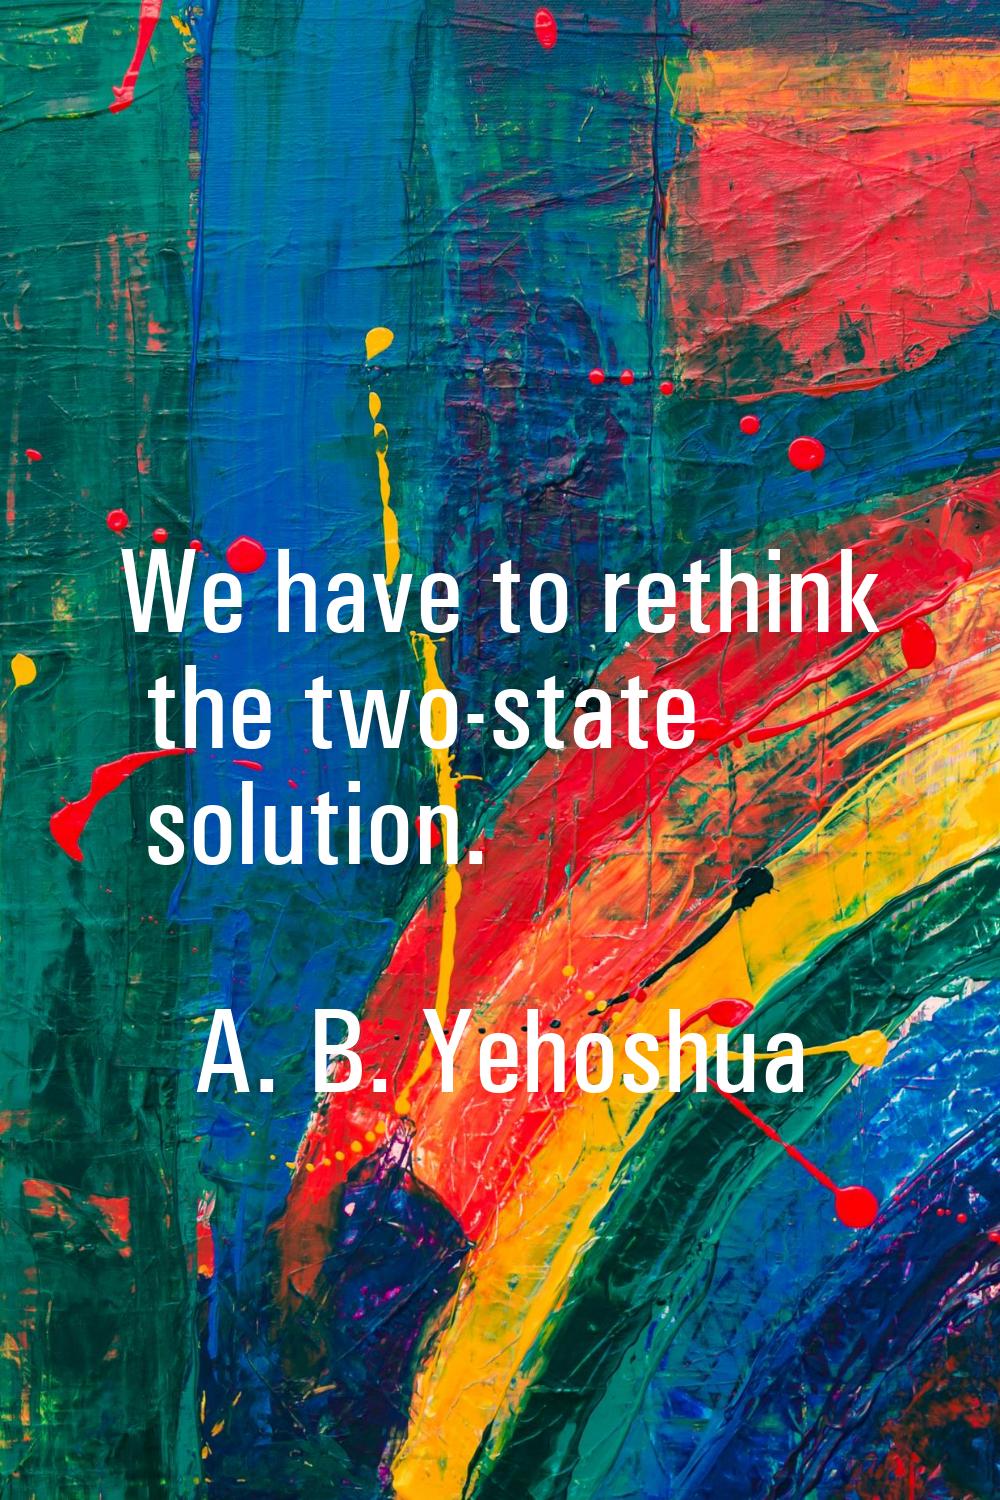 We have to rethink the two-state solution.